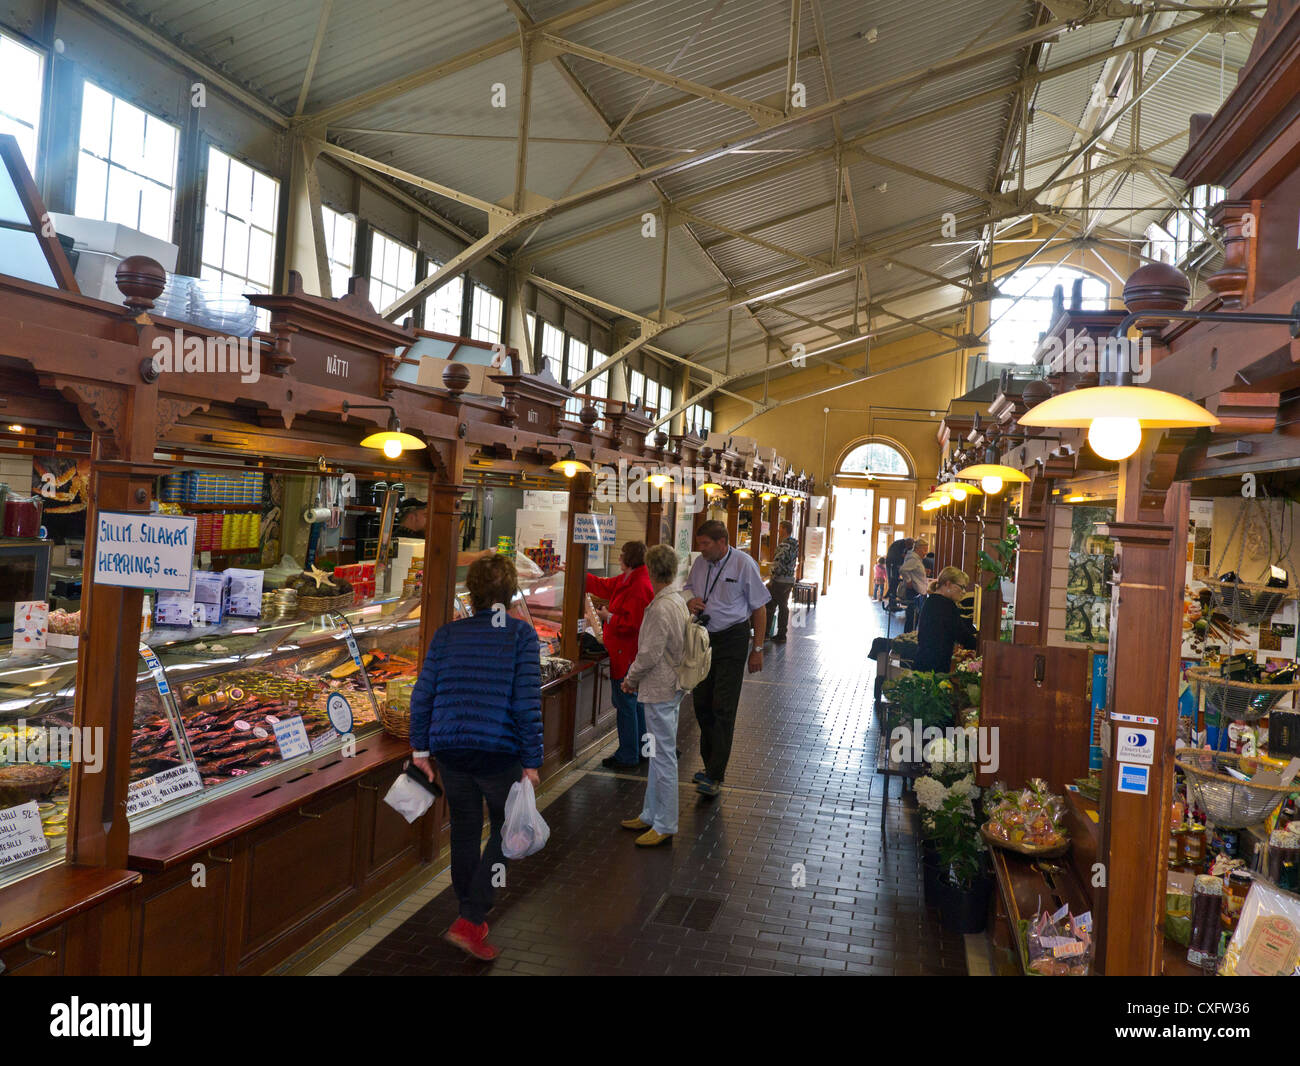 HELSINKI MARKET The Old Market Hall (Kauppahalli) with an extensive range of exotic local Finnish foods and products Helsinki Harbour Finland Stock Photo